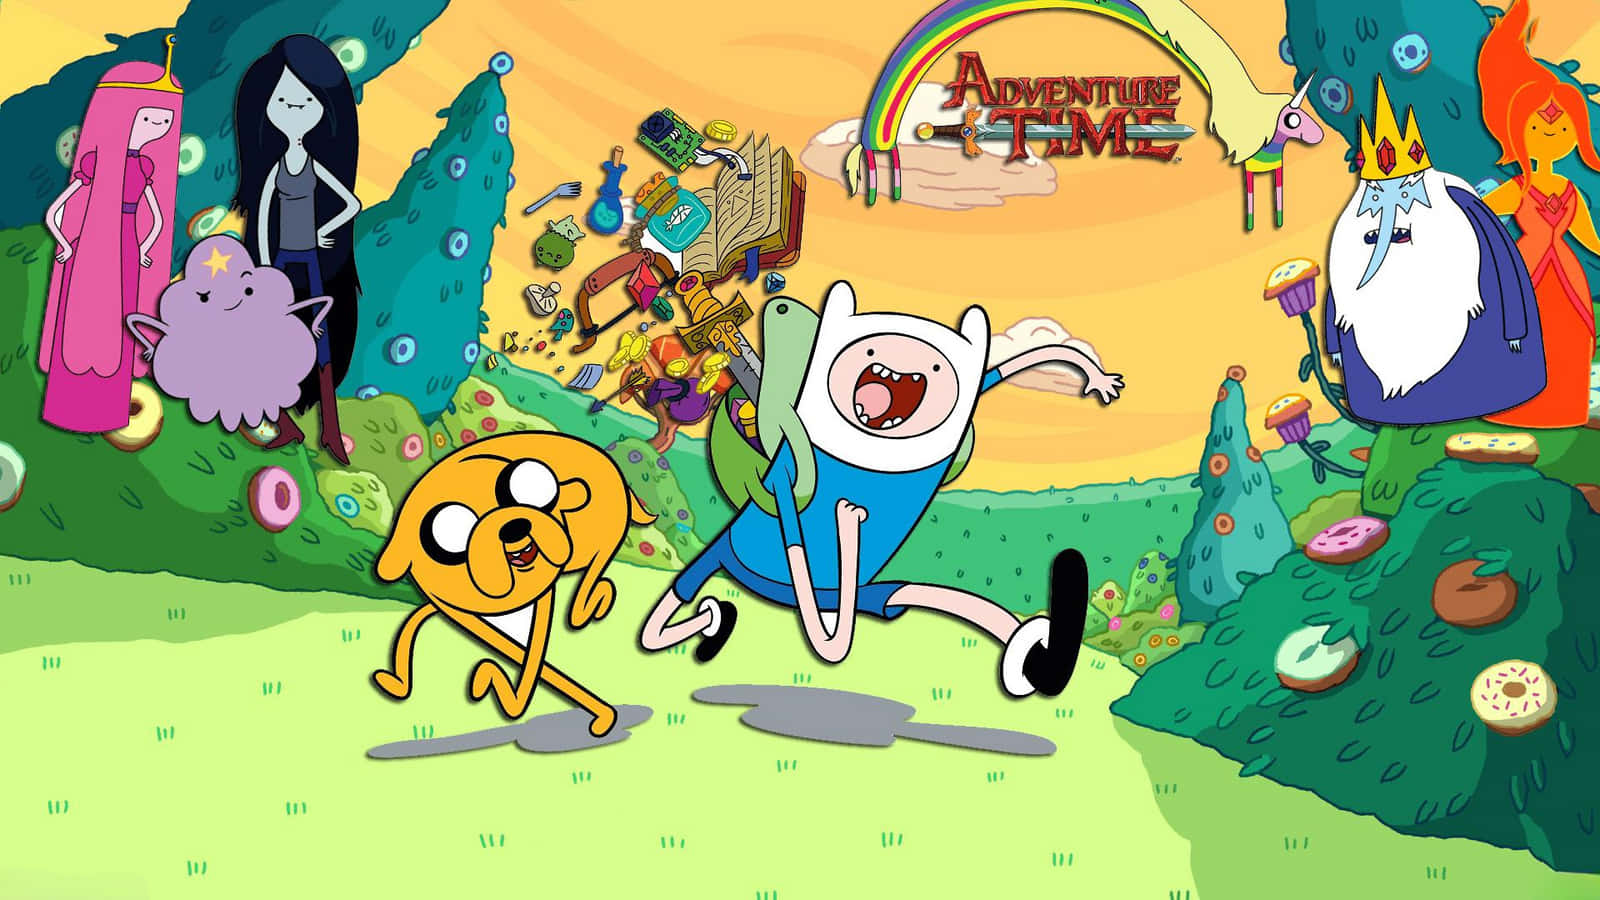 'Explore a magical world with Finn and Jake.'